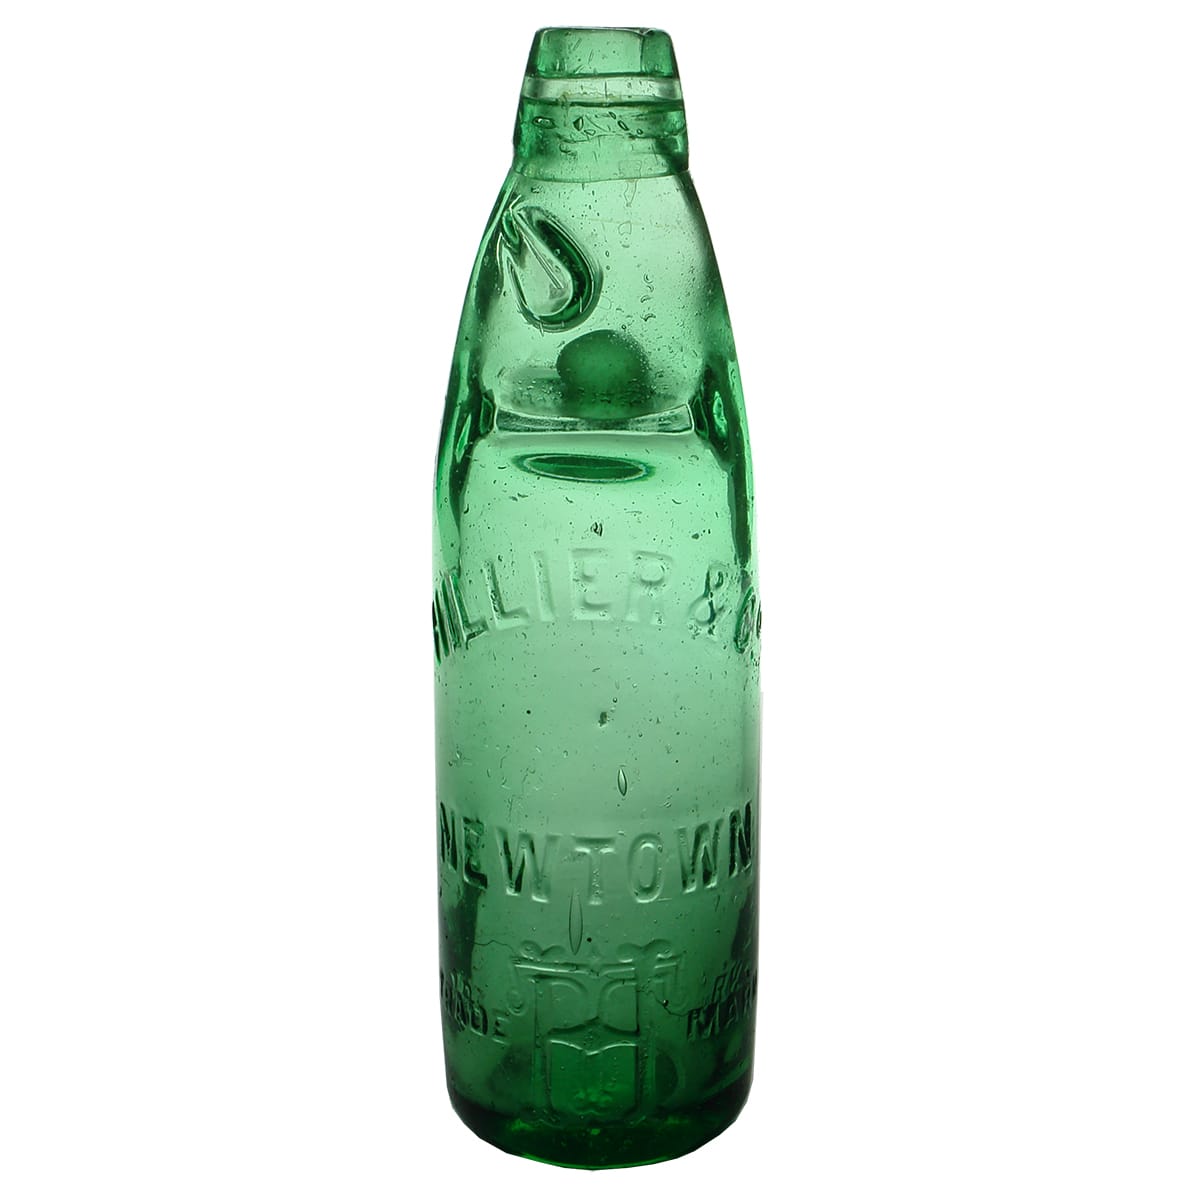 Codd. Hillier & Co., Newtown. One way pour. Bright Green. 10 oz. (New South Wales)